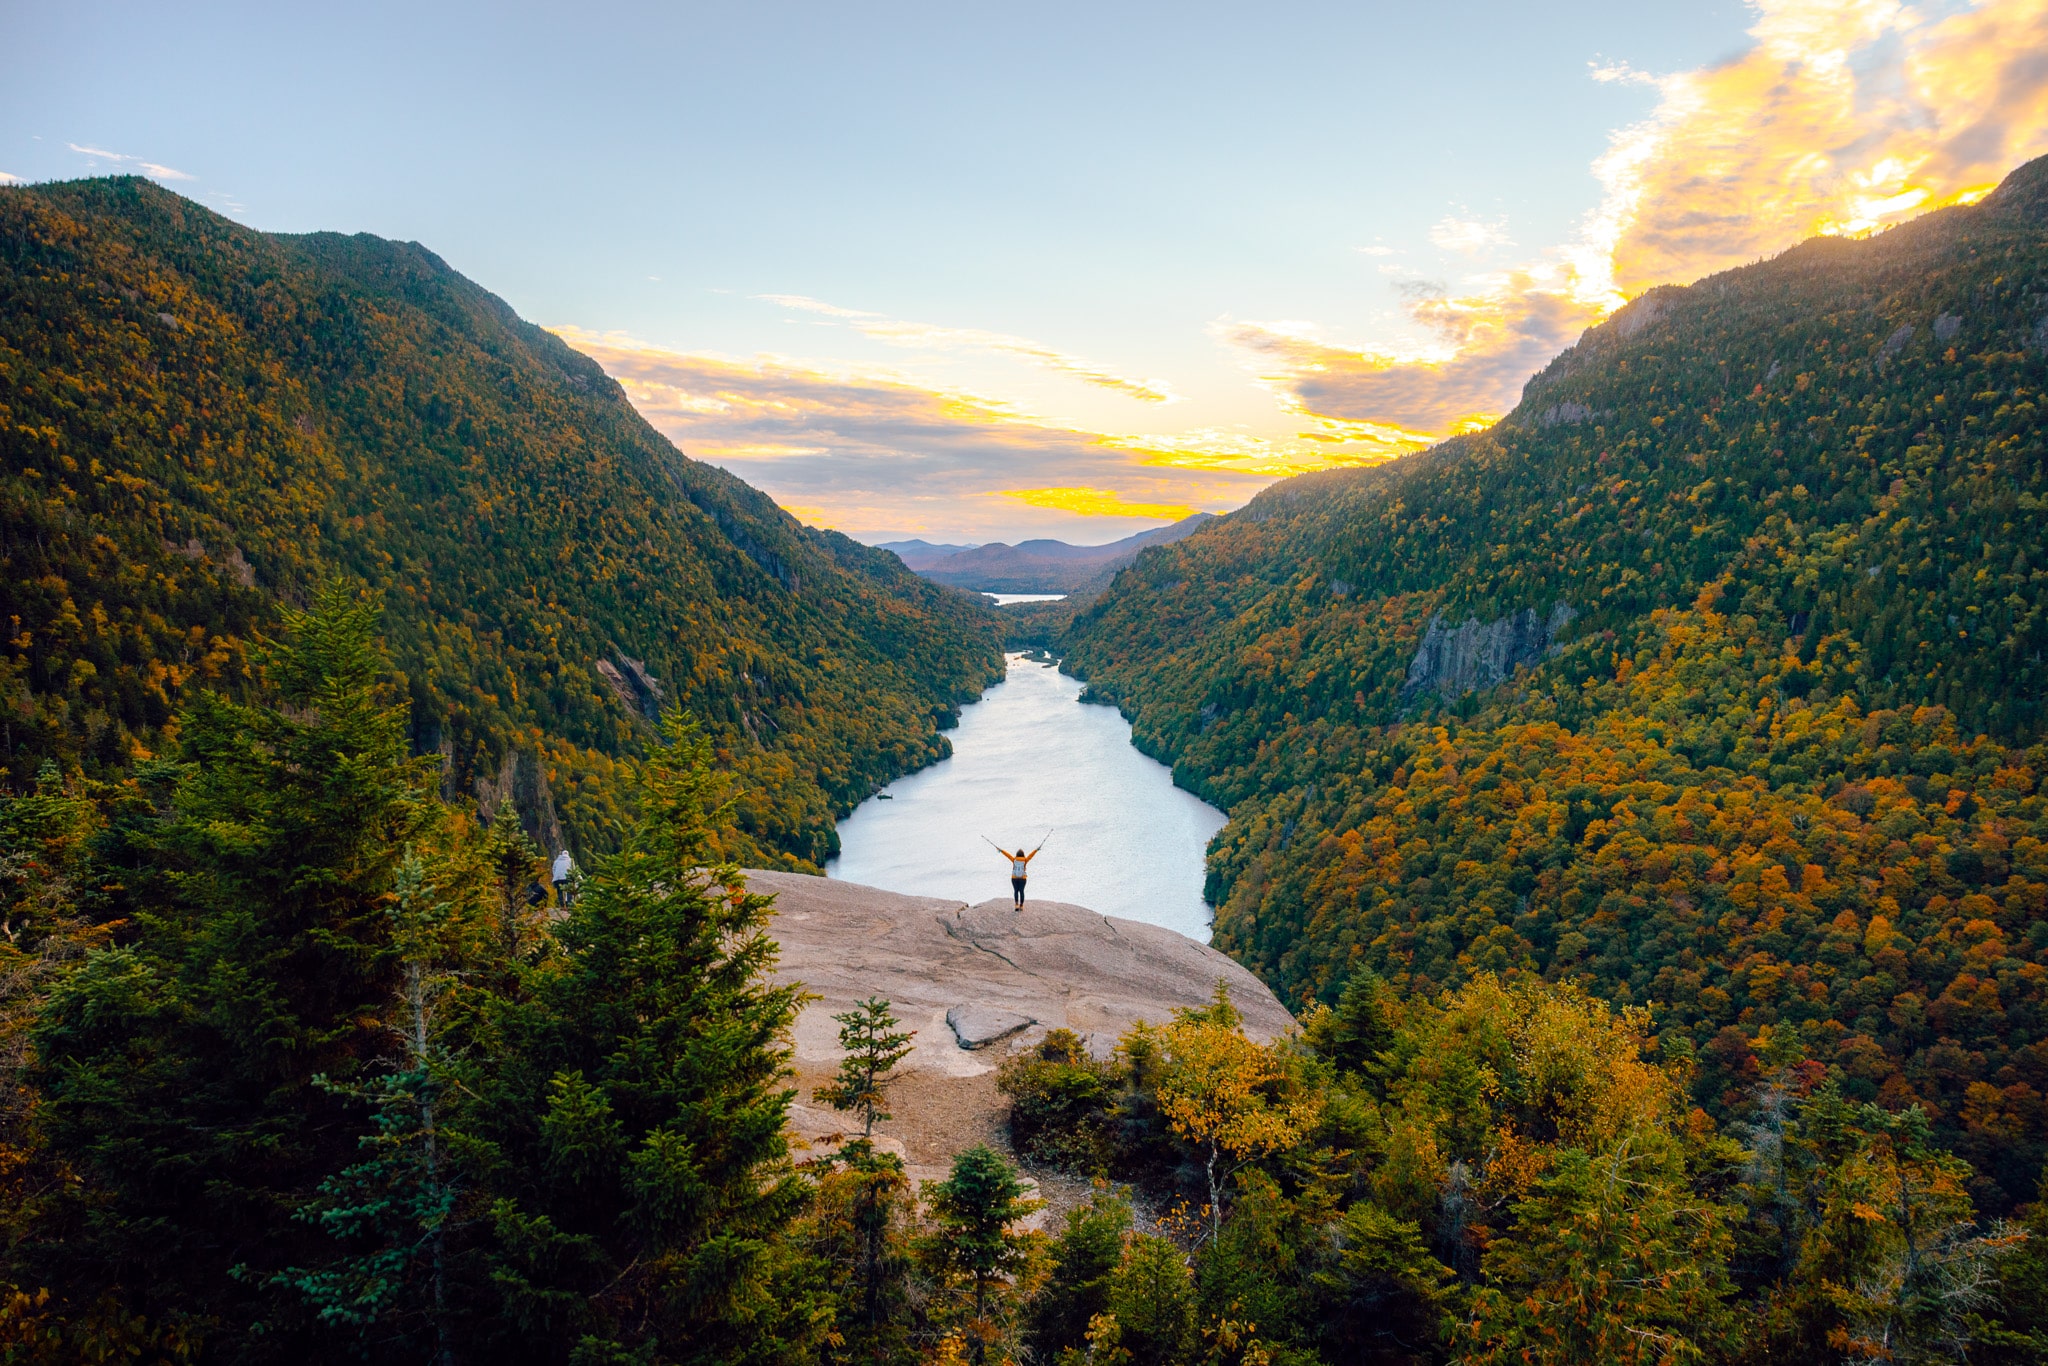 Indian Head hike in the Adirondacks is one of the best hiking trails in New York State